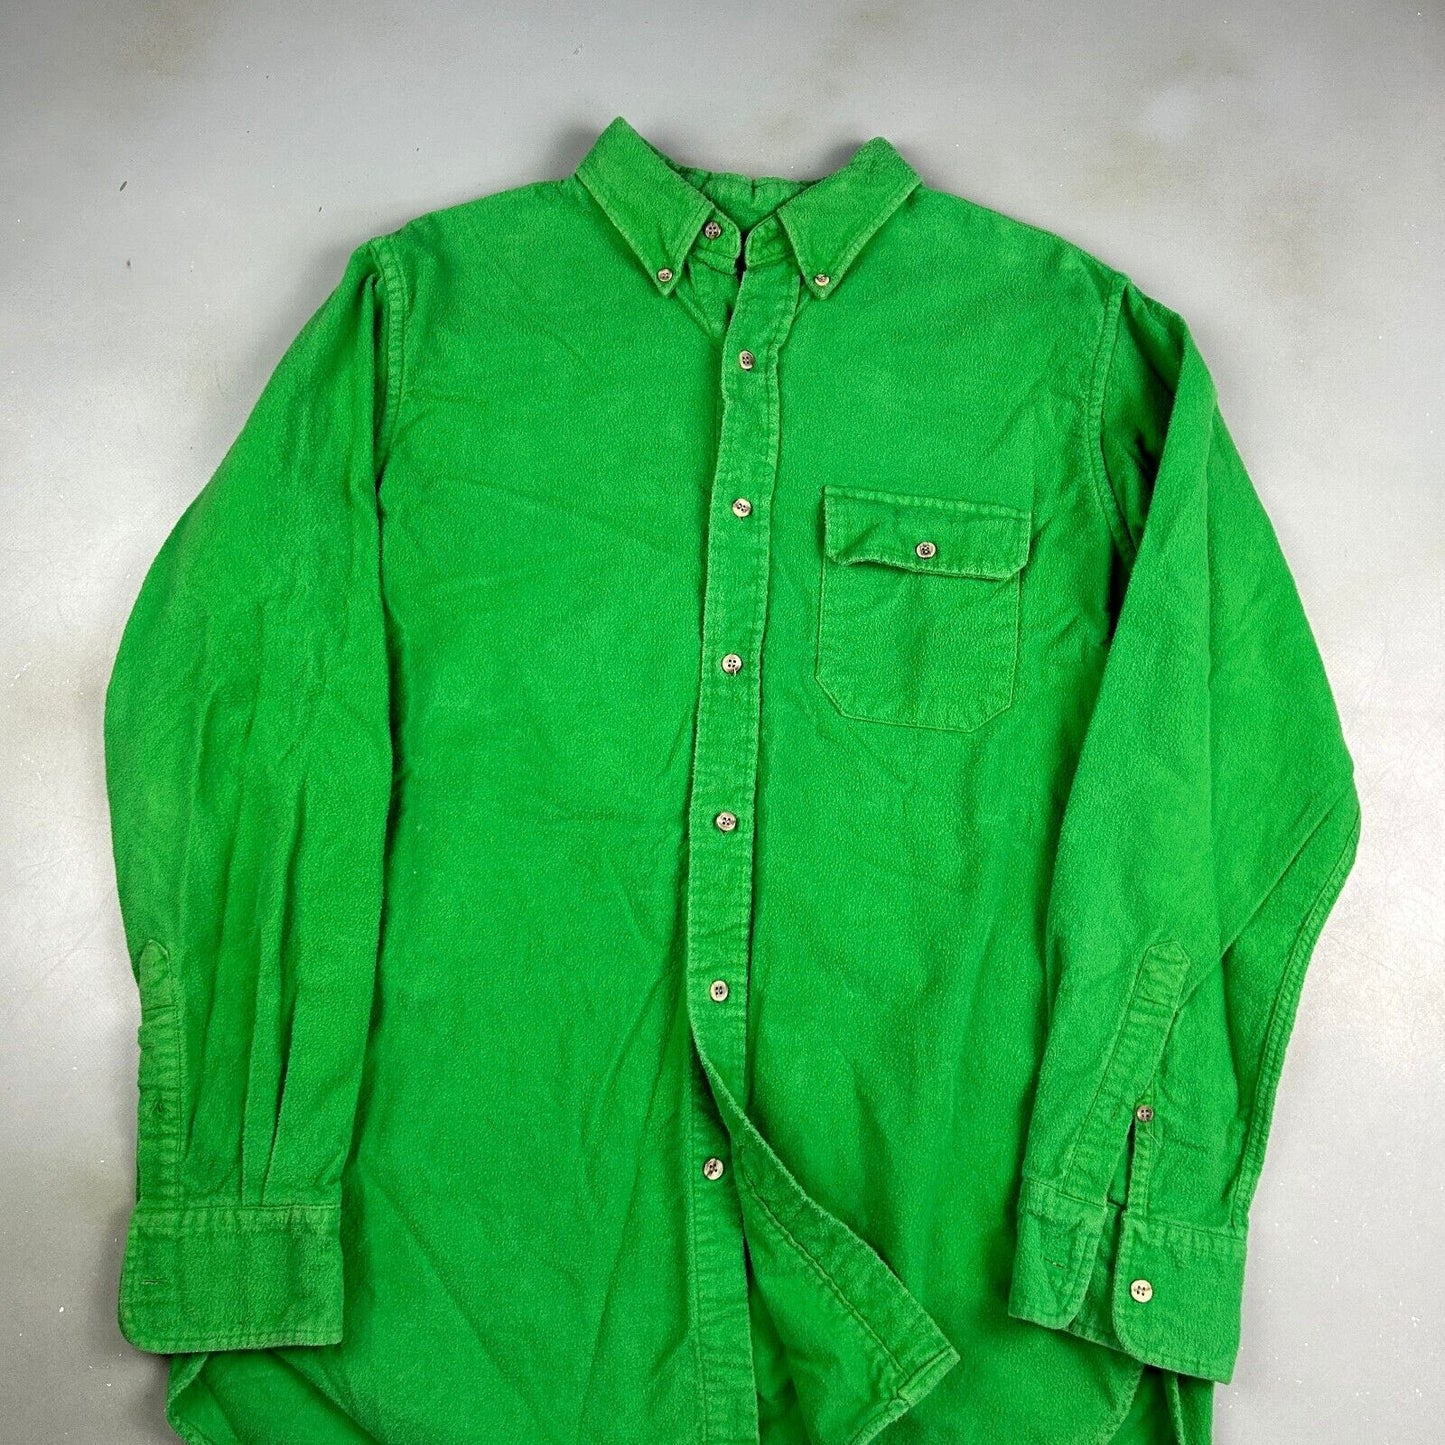 VINTAGE 90s Blank Green Chamois Cloth Button Up Shirt sz Large Adult